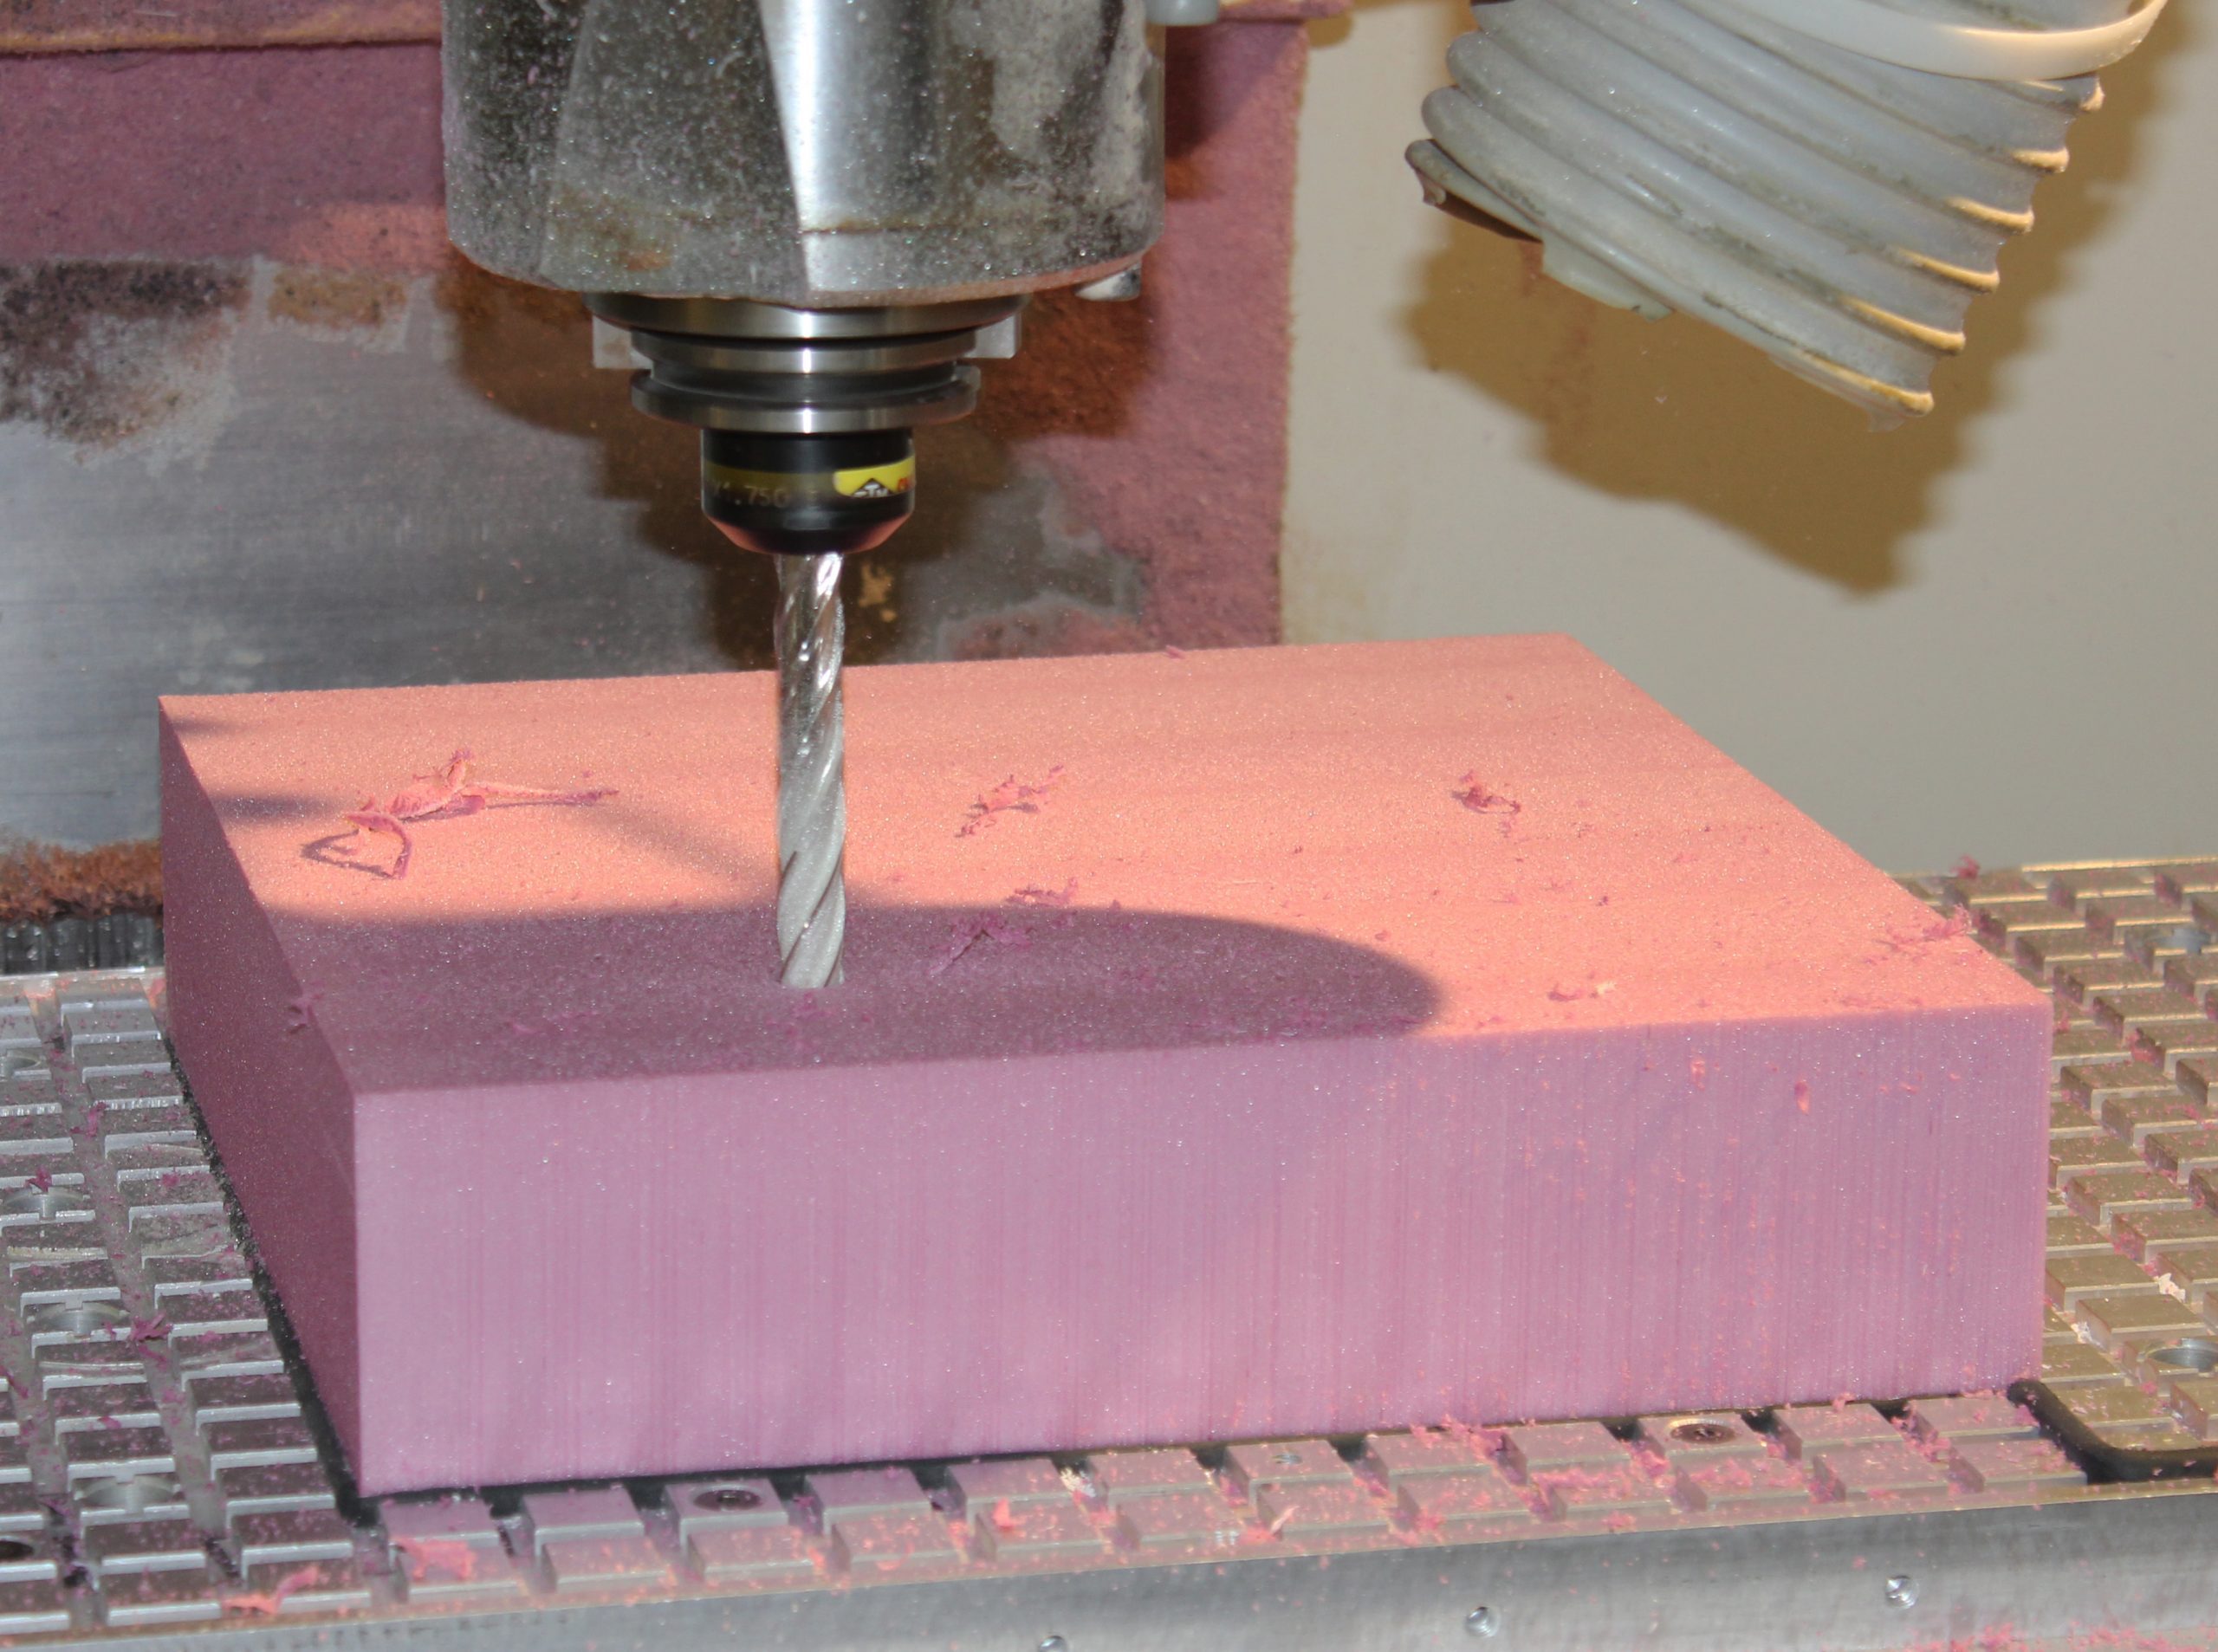 Rigid Foam Machining services from American Micro Industries.